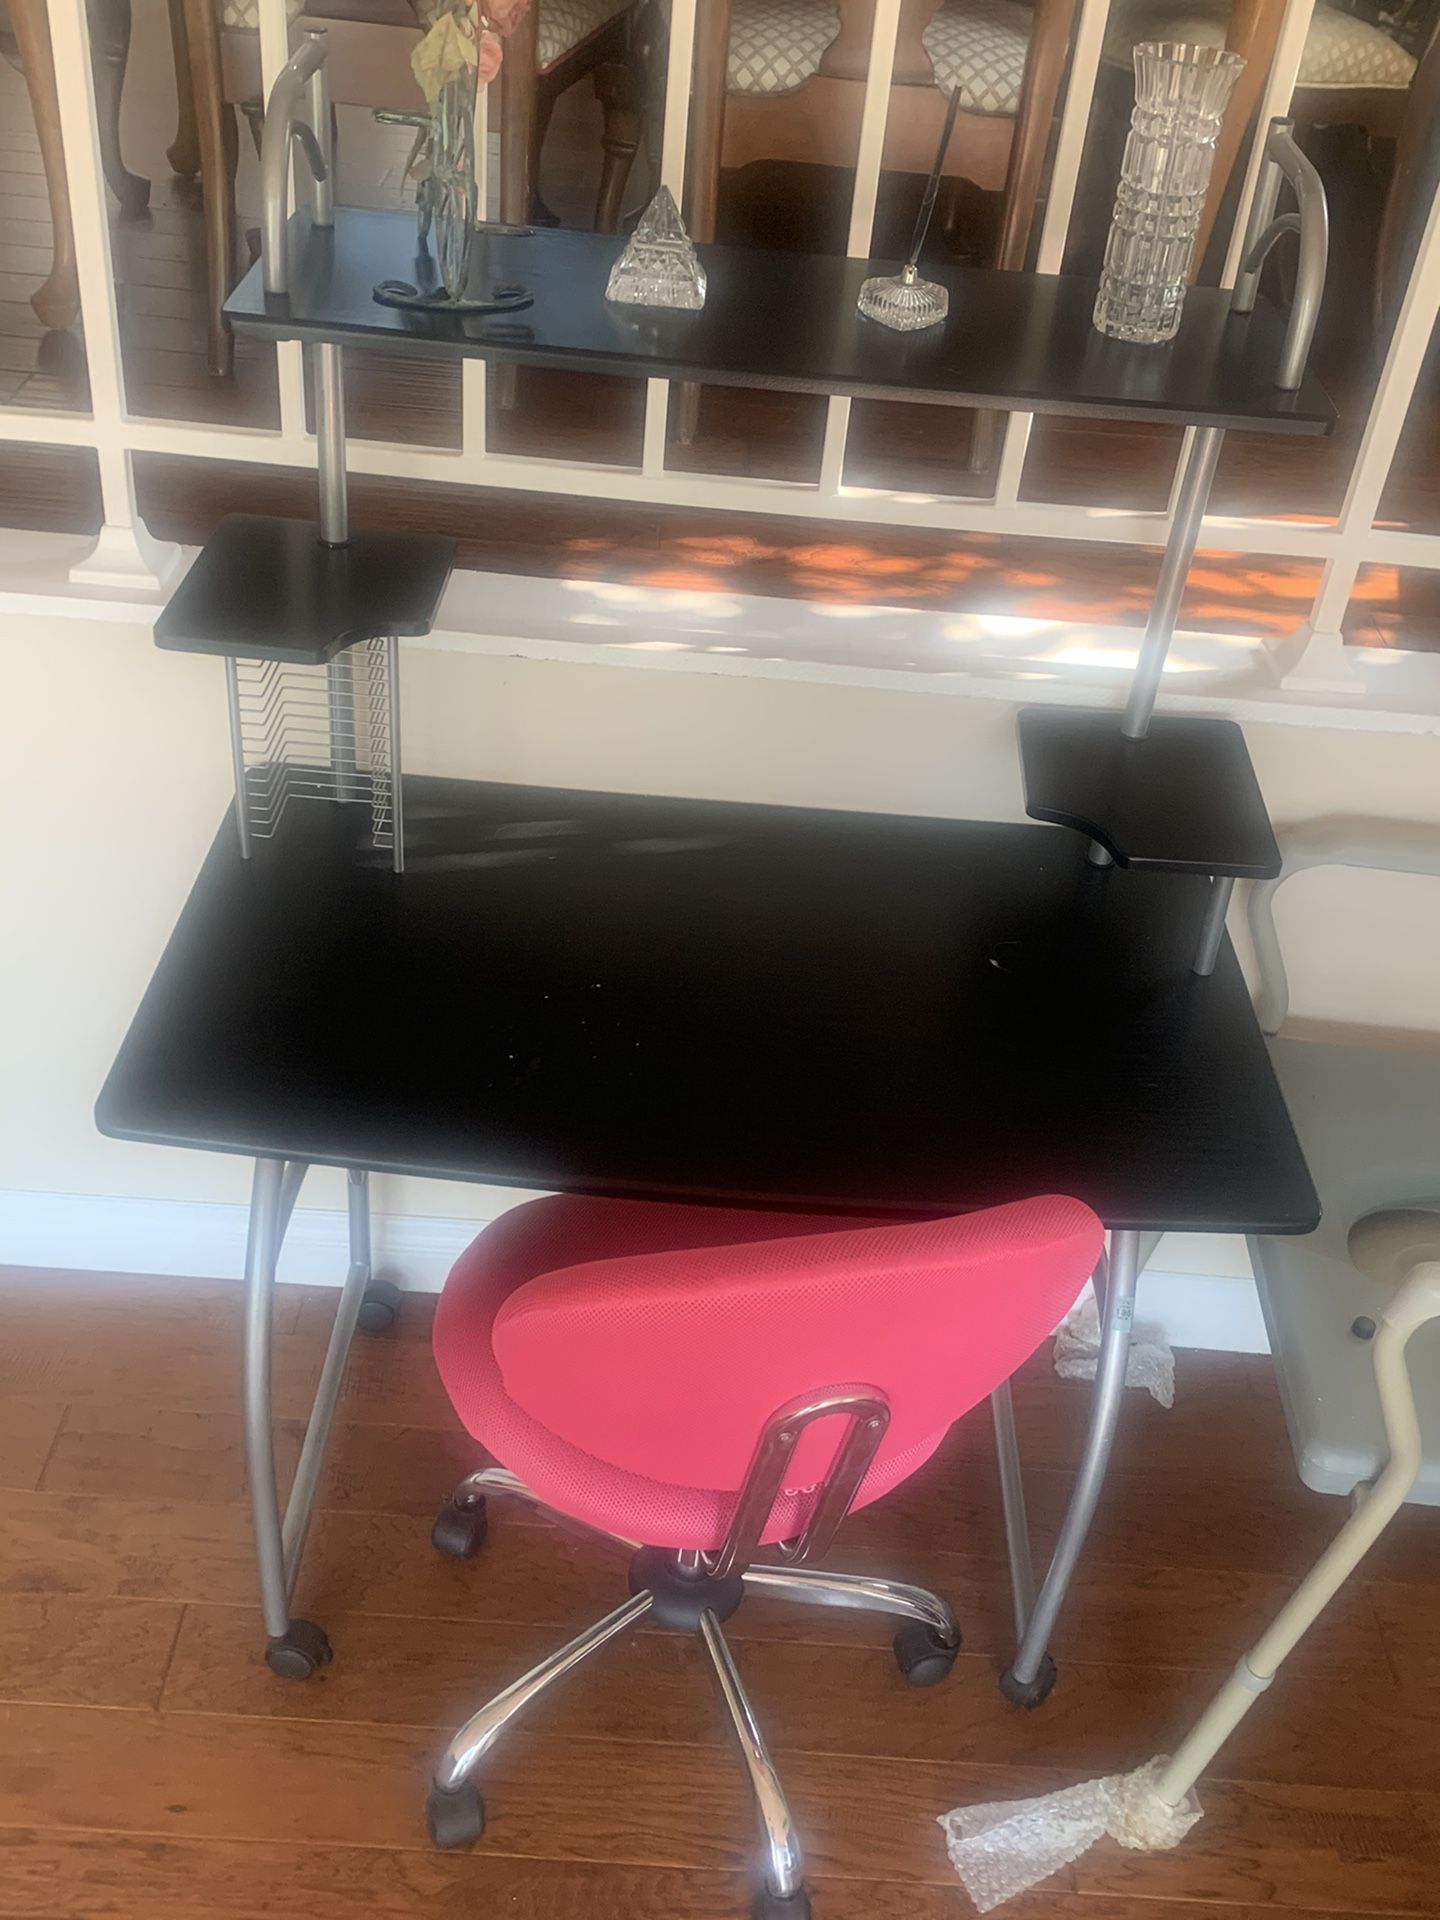 Desk with rolling chair